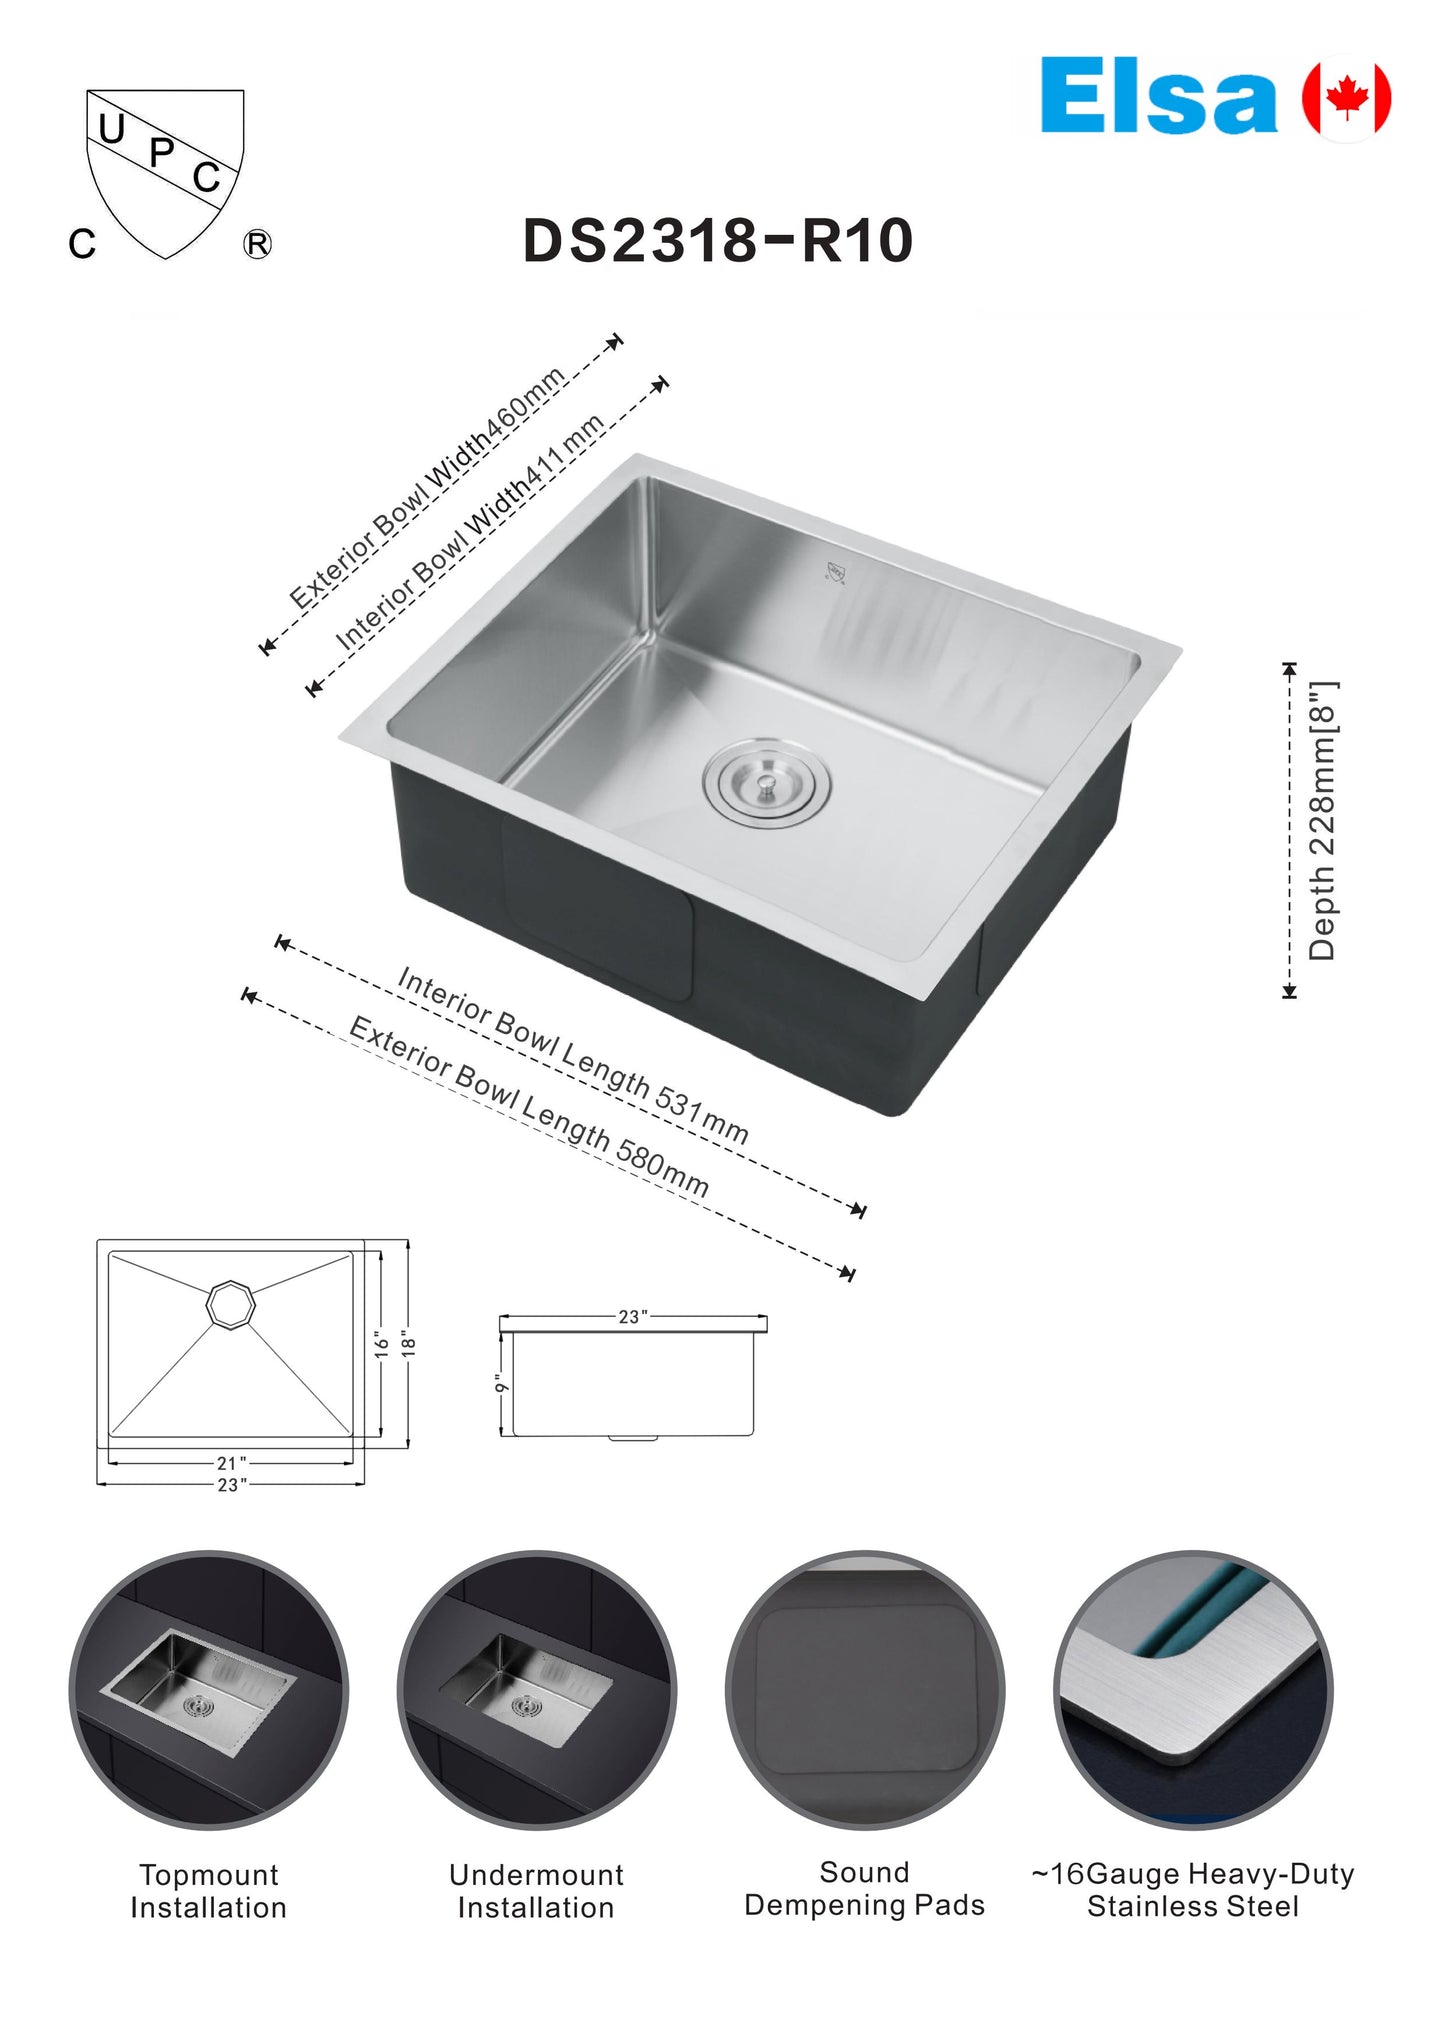 *PROMOTION* handmade kitchen sink DS2318-R10 undermount single bowl 16 gauged (drains not included)590x460x228mm (23-1/4"x18"x9") inside 21.3"x16.18"x9" $99